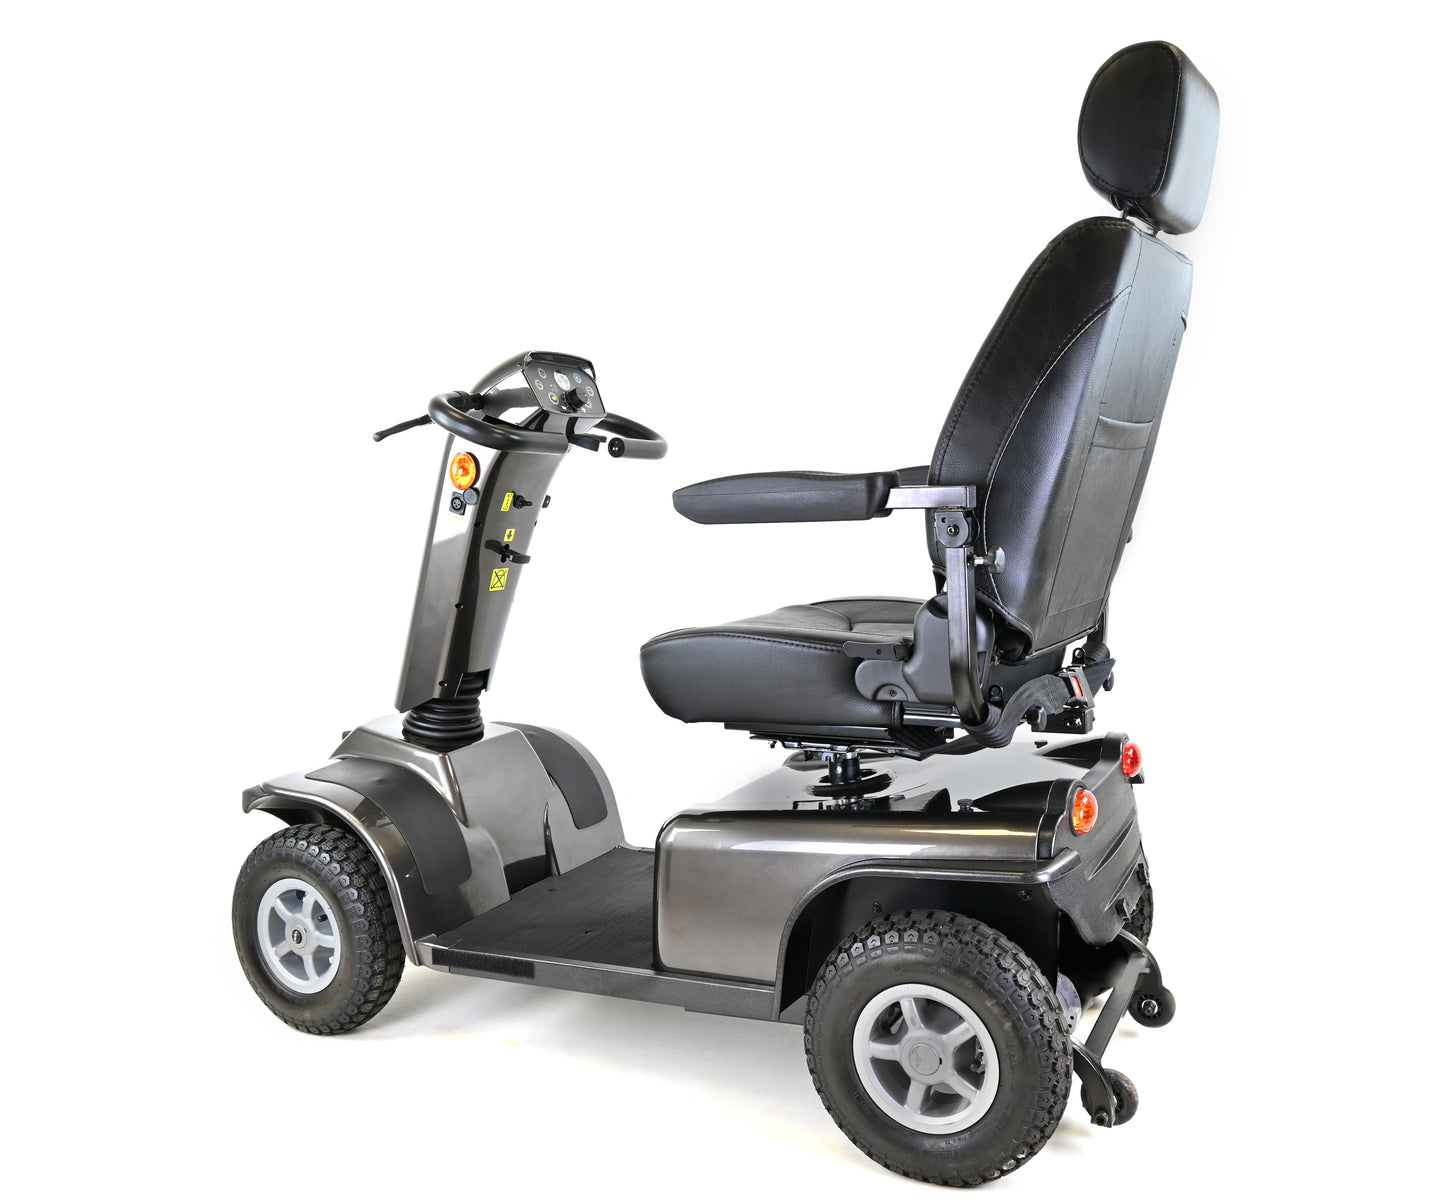 Omega 8 - 8 mph Mobility Scooter